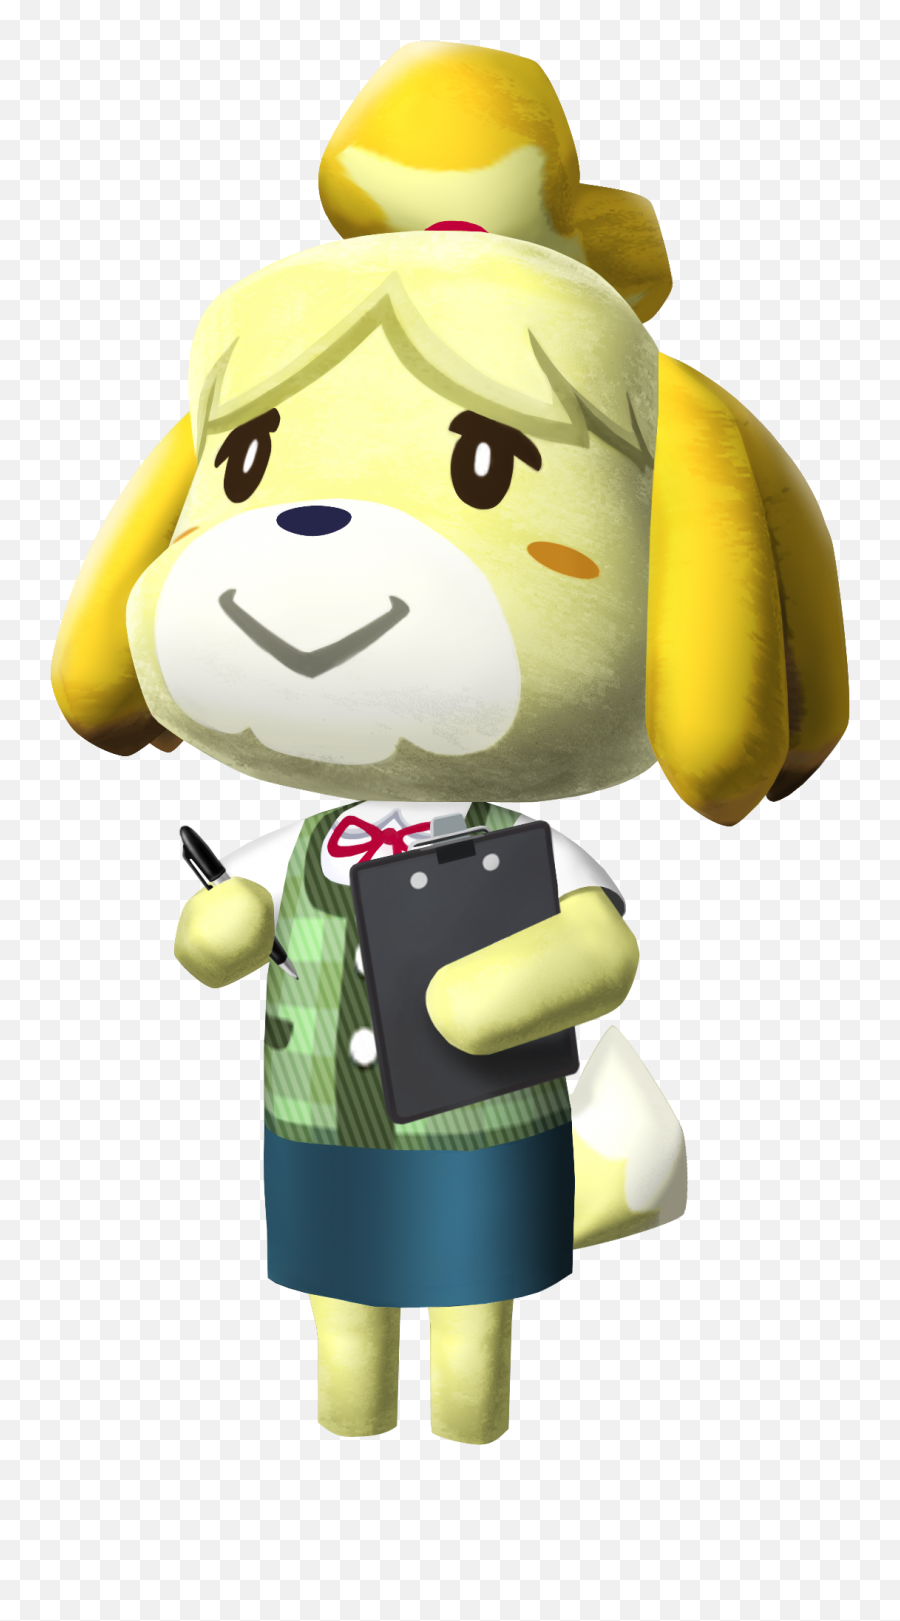 Learning To Love Animal Crossing Again - New Leaf Animal Crossing Dog Emoji,Animal Crossing You Learned A New Emotion